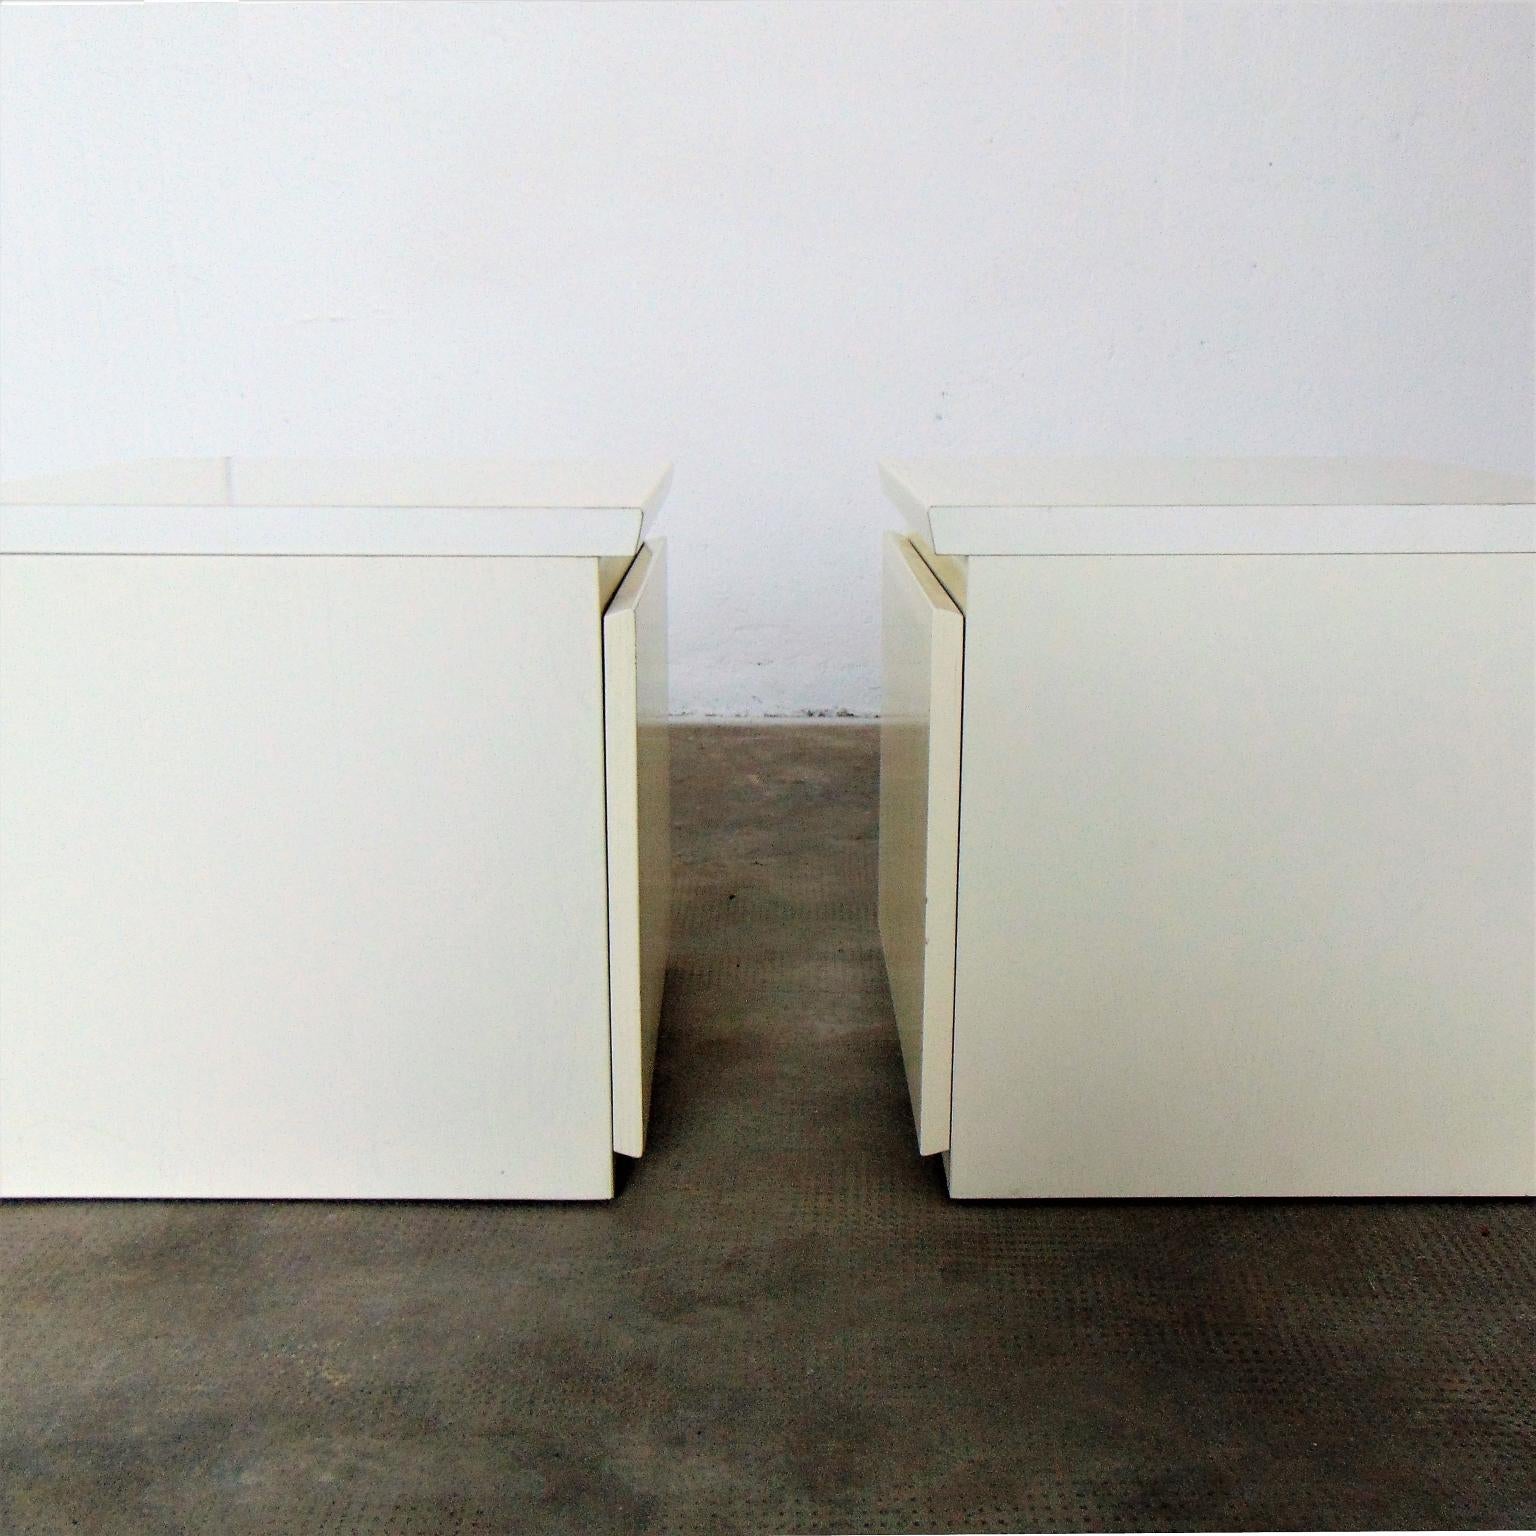 1979 Claudio Salocchi Two Low Cabinets in White Lacquer by Sormani, Italy For Sale 6